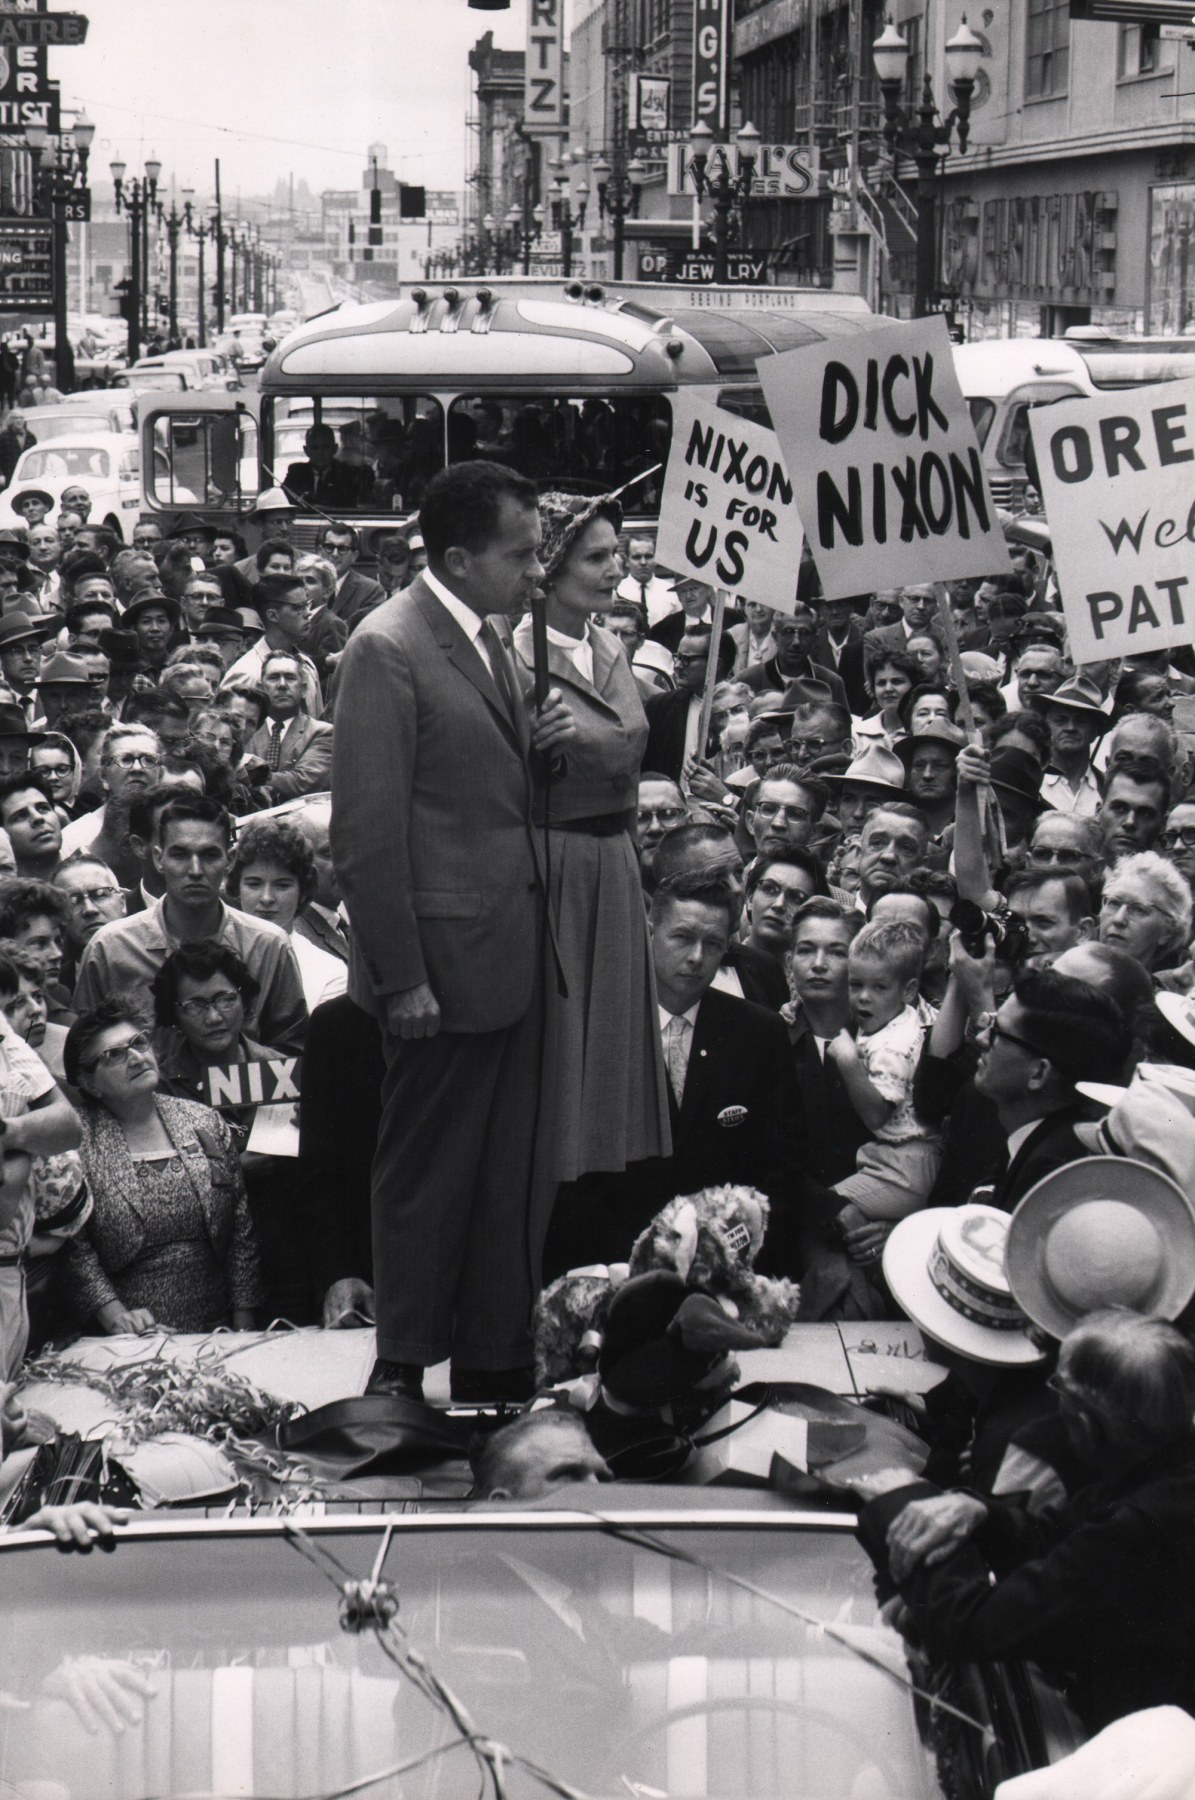 Ed Clark, Nixon campaigning in the 1960 presidential election, ​1960. Subject stands on the back of a car speaking into a microphone surrounded by a large crowd holding signs such as &quot;Nixon is for us&quot; and &quot;Dick Nixon&quot;